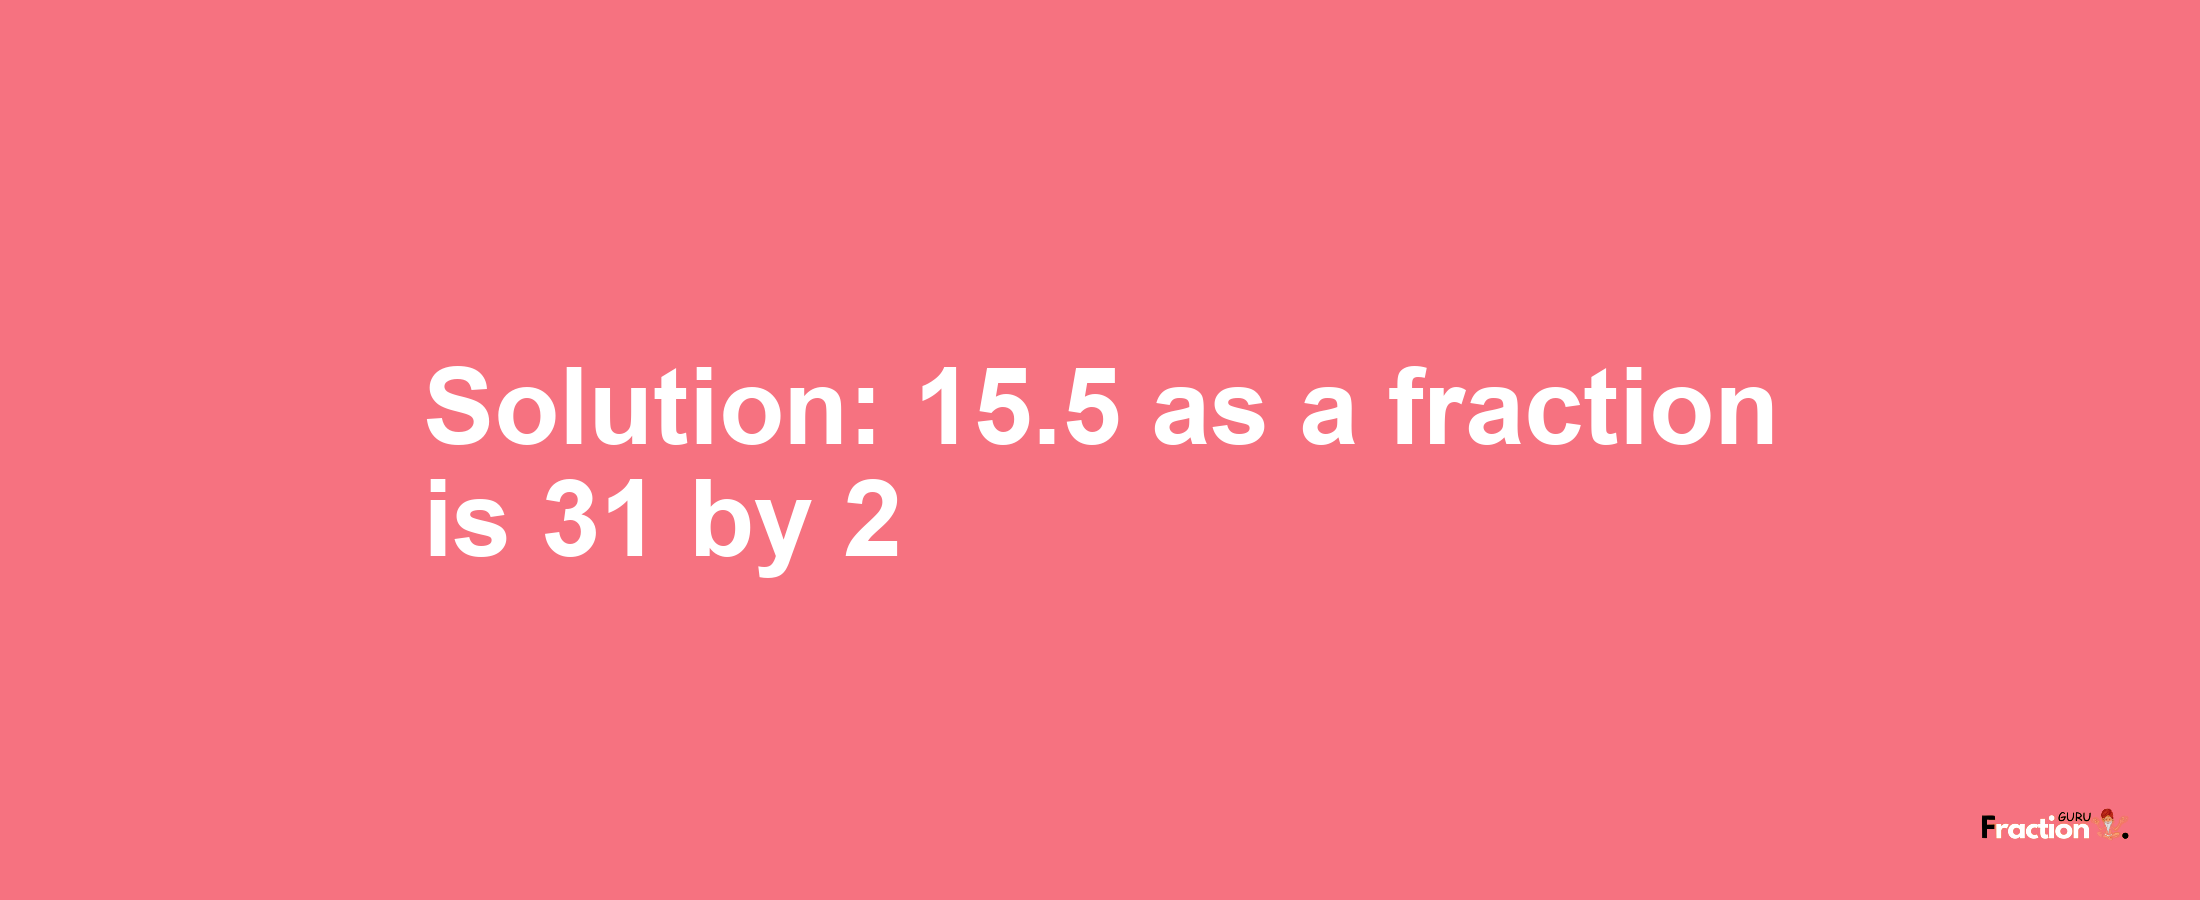 Solution:15.5 as a fraction is 31/2